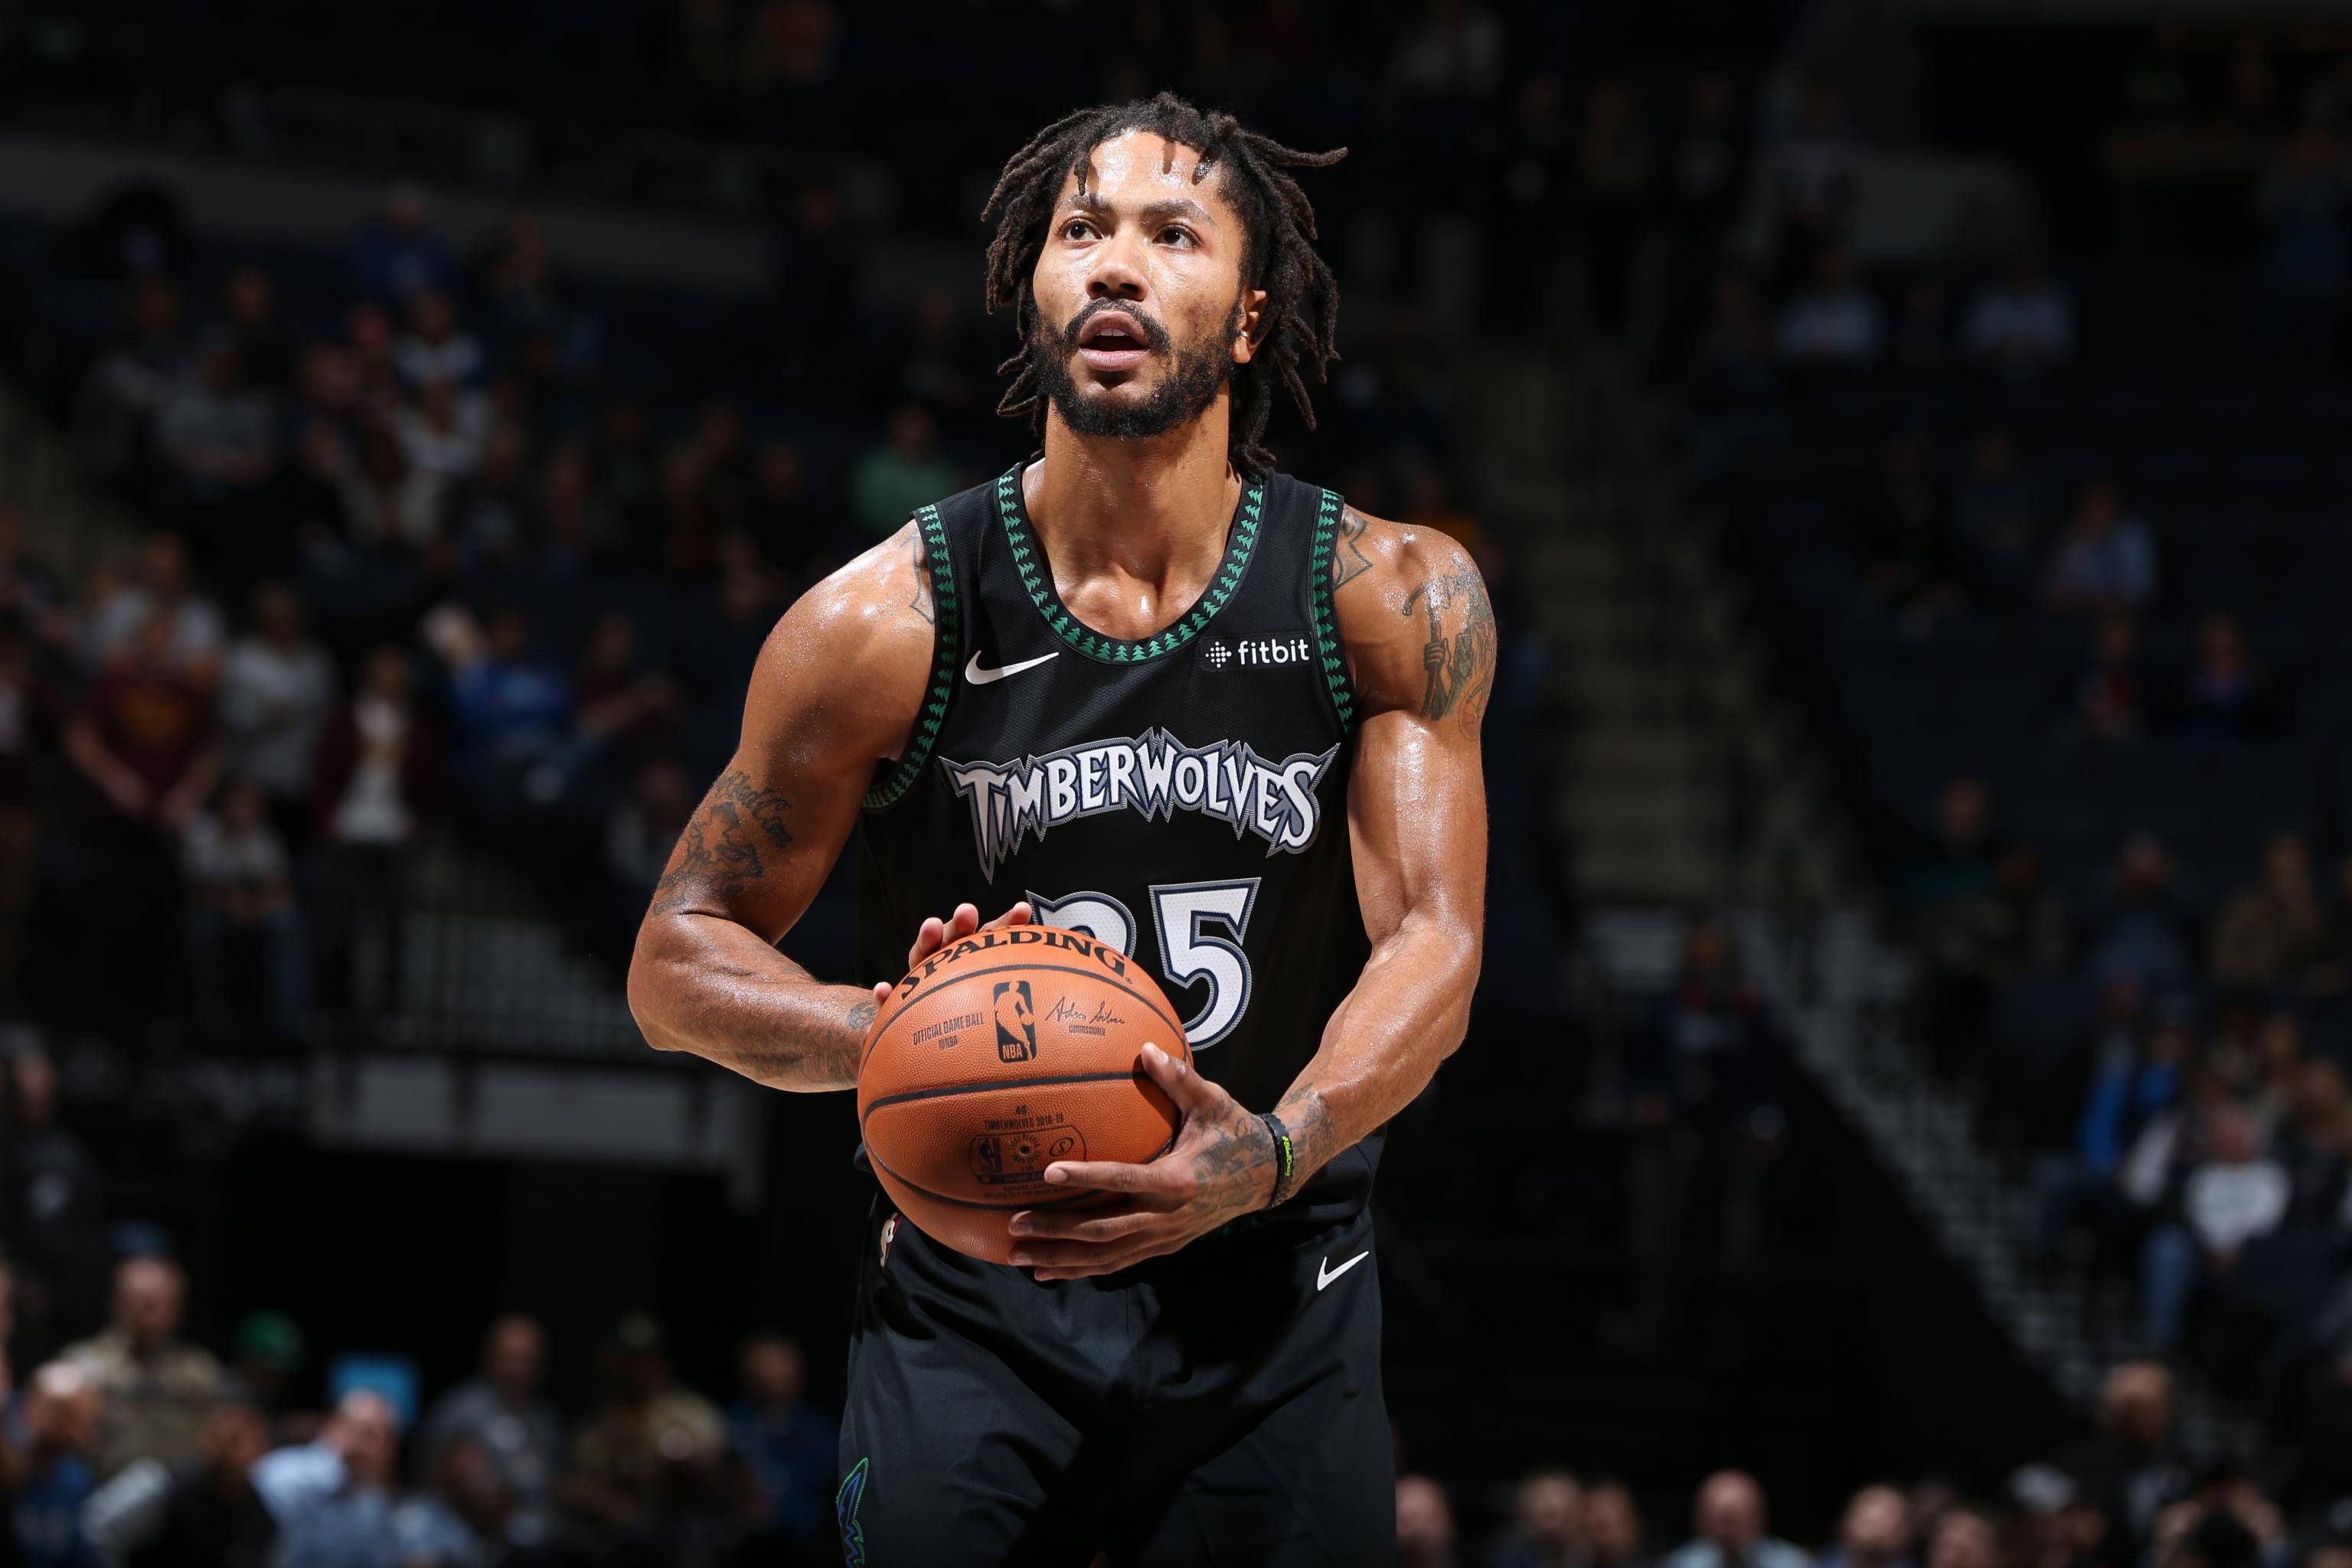 Timberwolves' Derrick Rose is 'day to day' with sprained right ankle